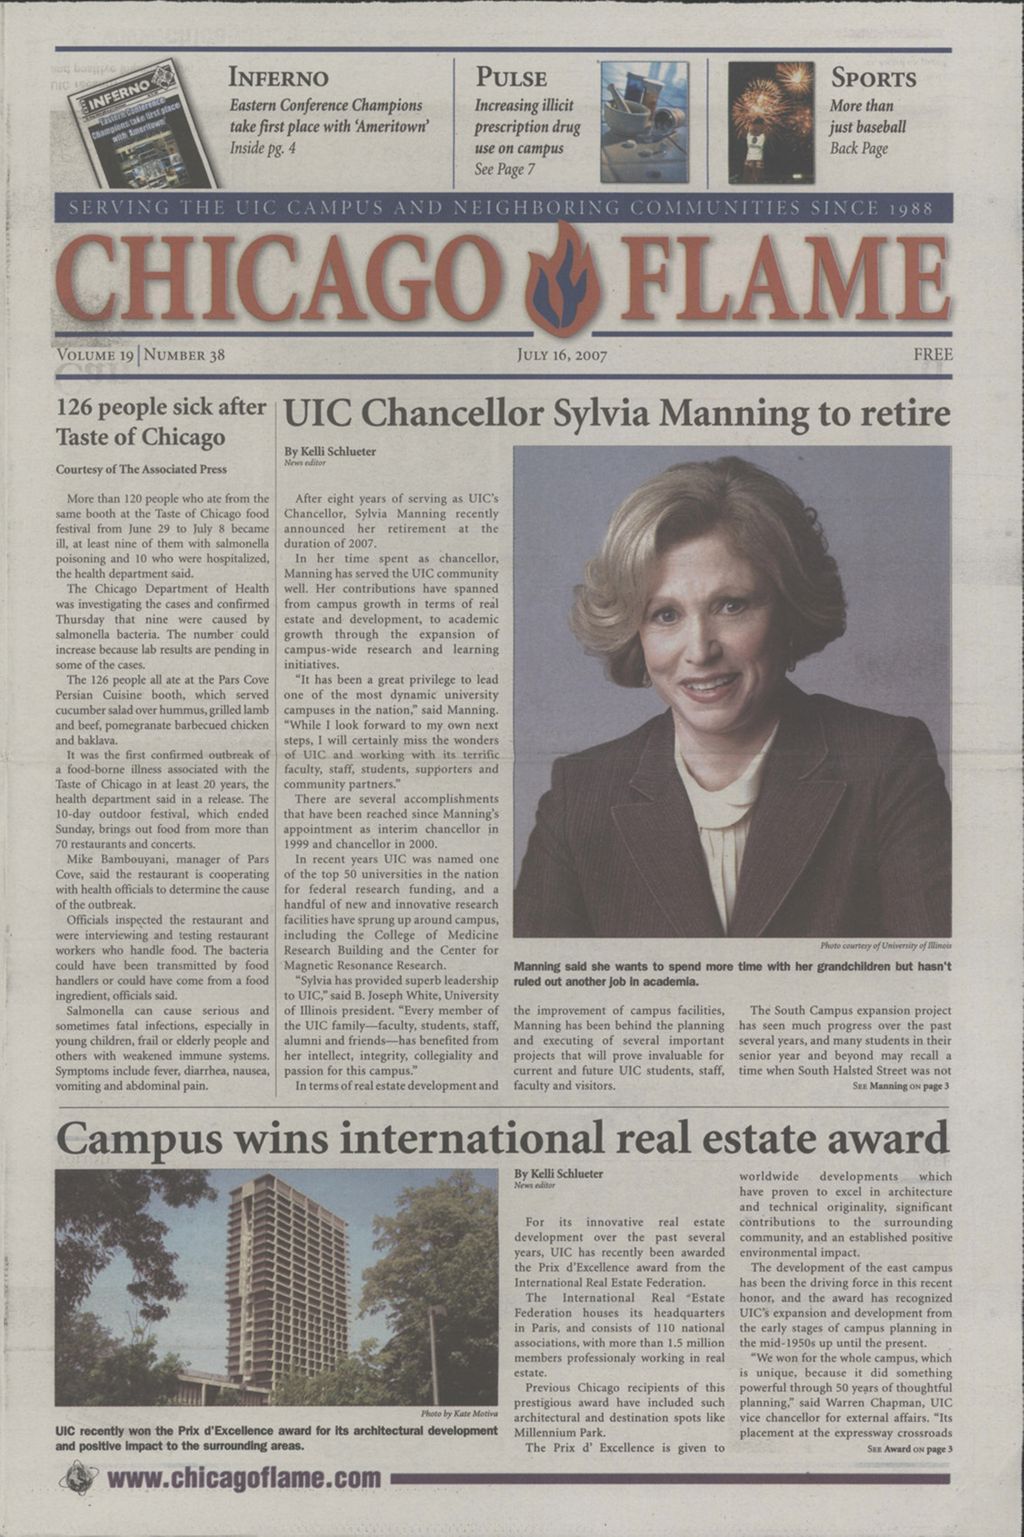 Miniature of Chicago Flame (July 16, 2007)